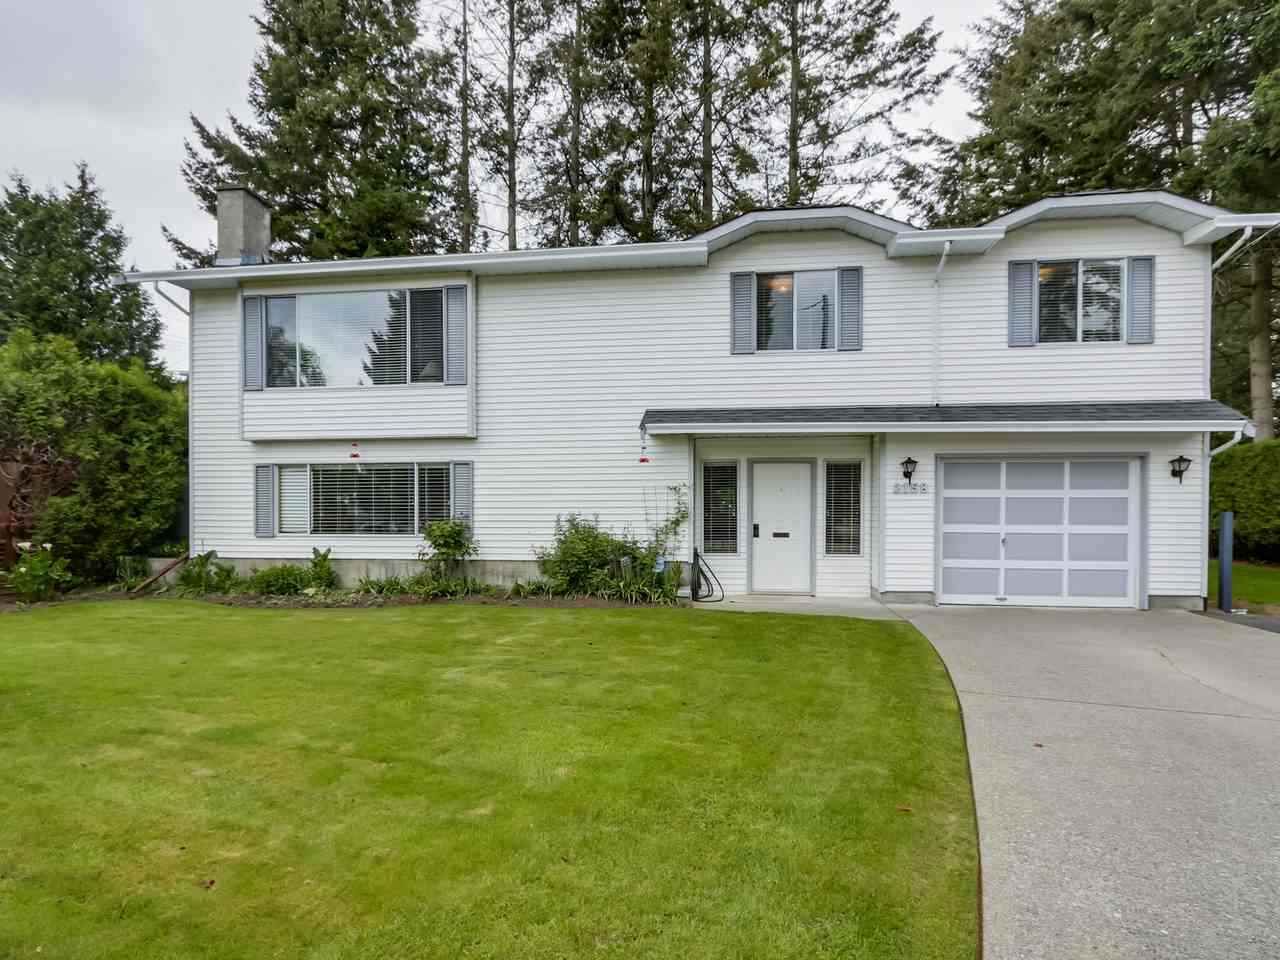 Main Photo: 2158 BOWLER Drive in Surrey: King George Corridor House for sale (South Surrey White Rock)  : MLS®# R2128949